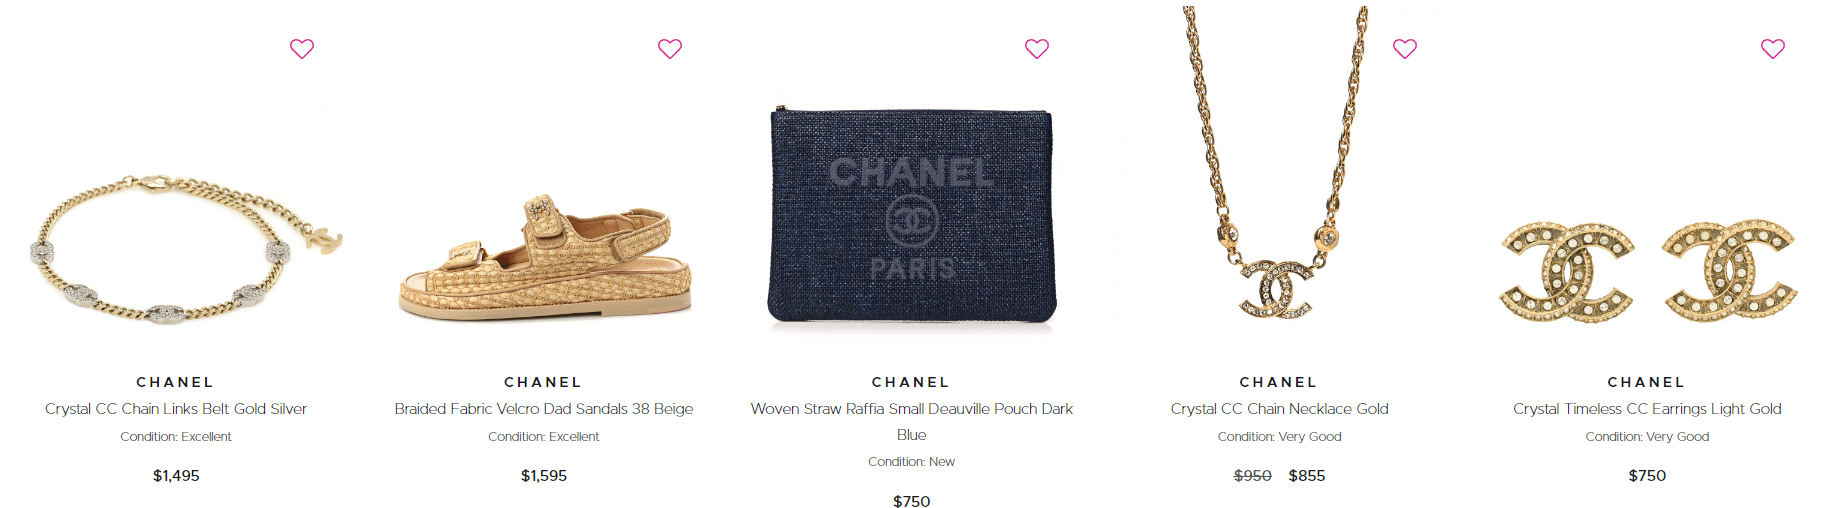 Cheapest thing in Chanel? Could it be. #cheapdesigner #designerfind